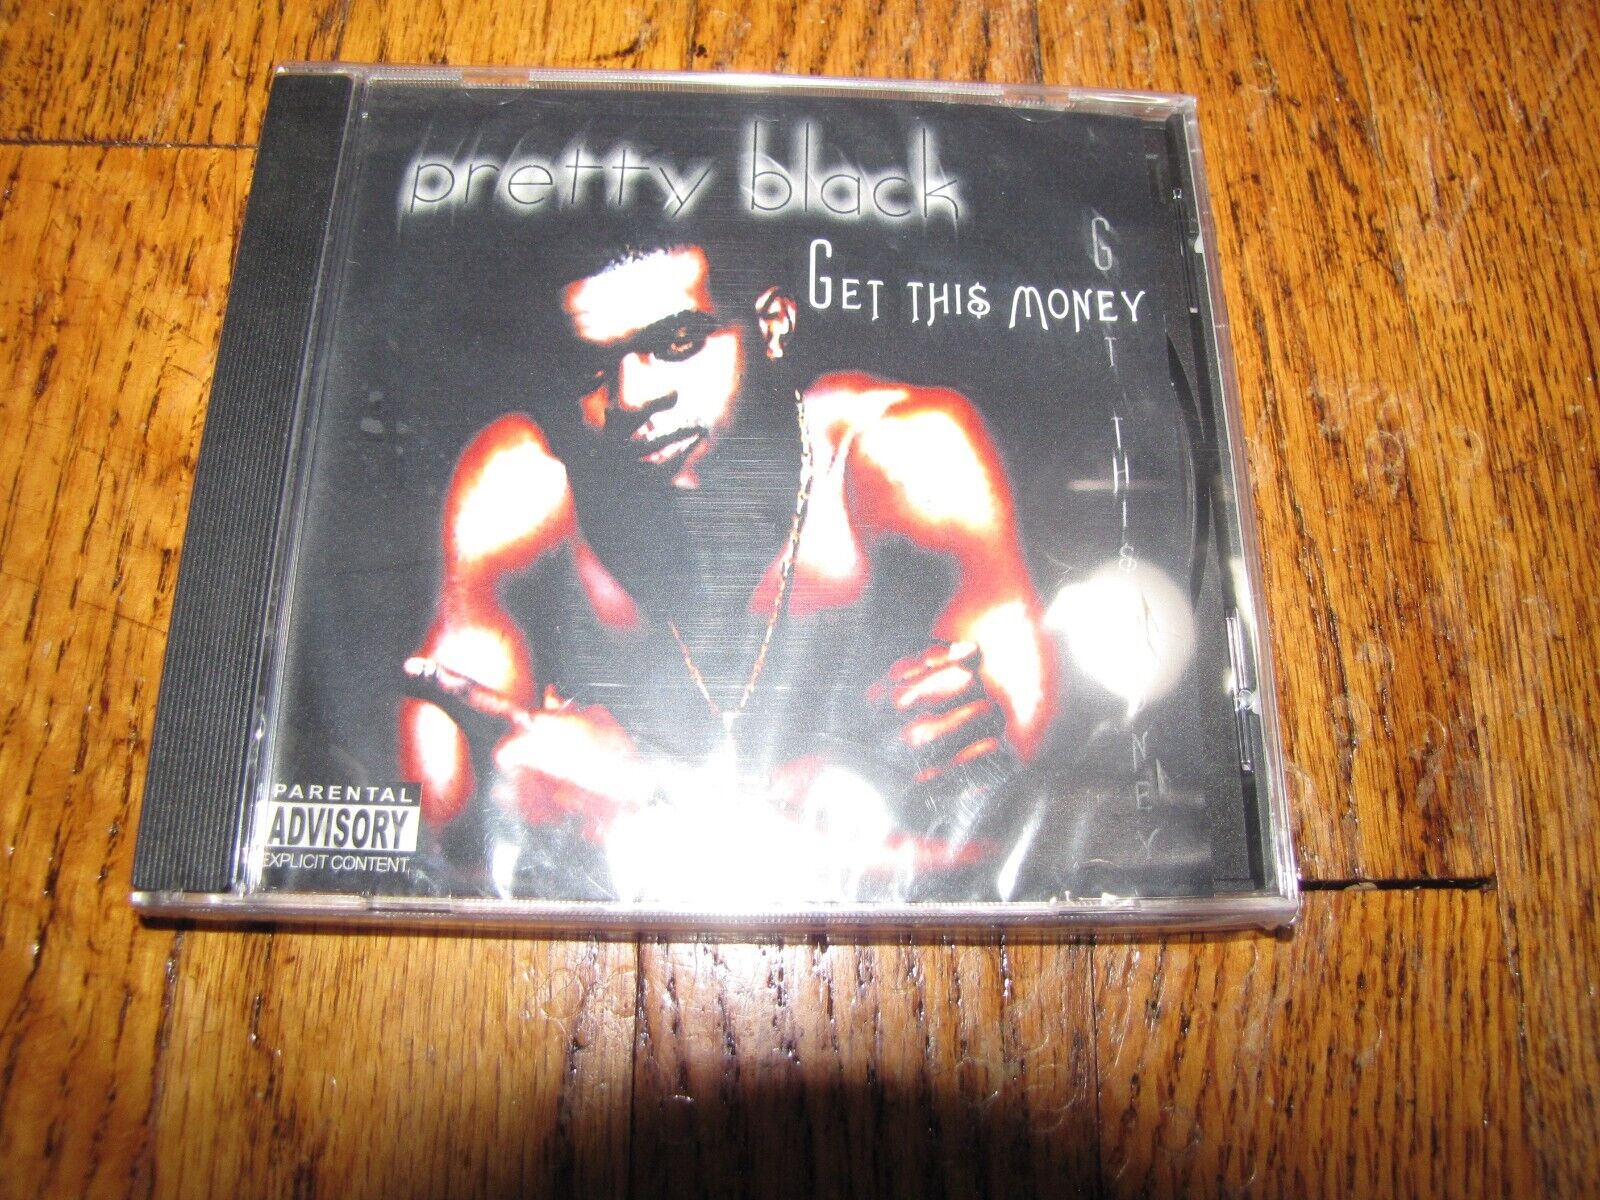 PRETTY BLACK - GET THIS MONEY - SEALED PRELUDE PCD 0003 CD